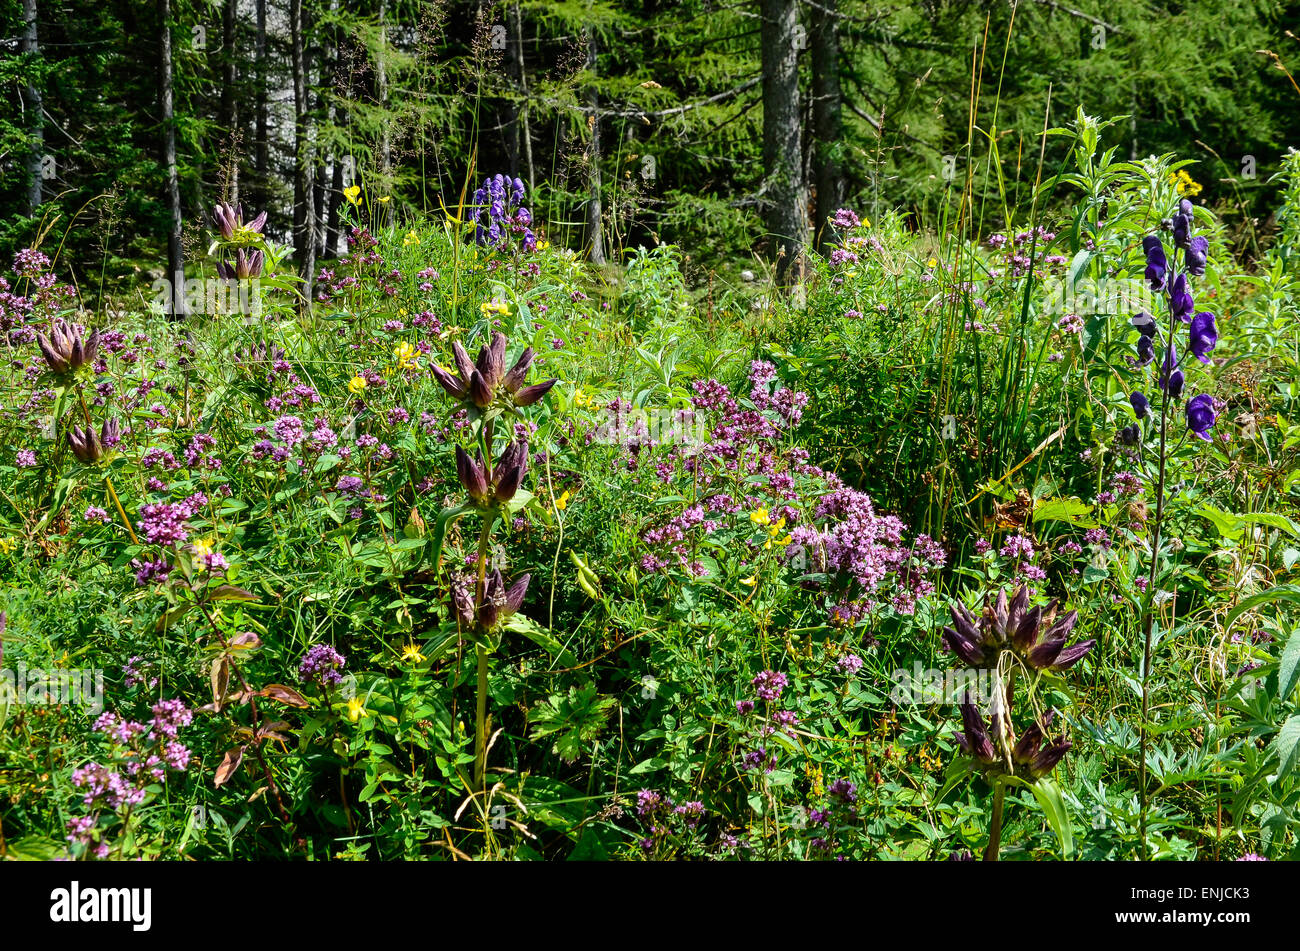 Hungarian Gentian Gentiana pannonica devil's helmet and many other wild flowers in the Alpine region of Ausseerland Stock Photo